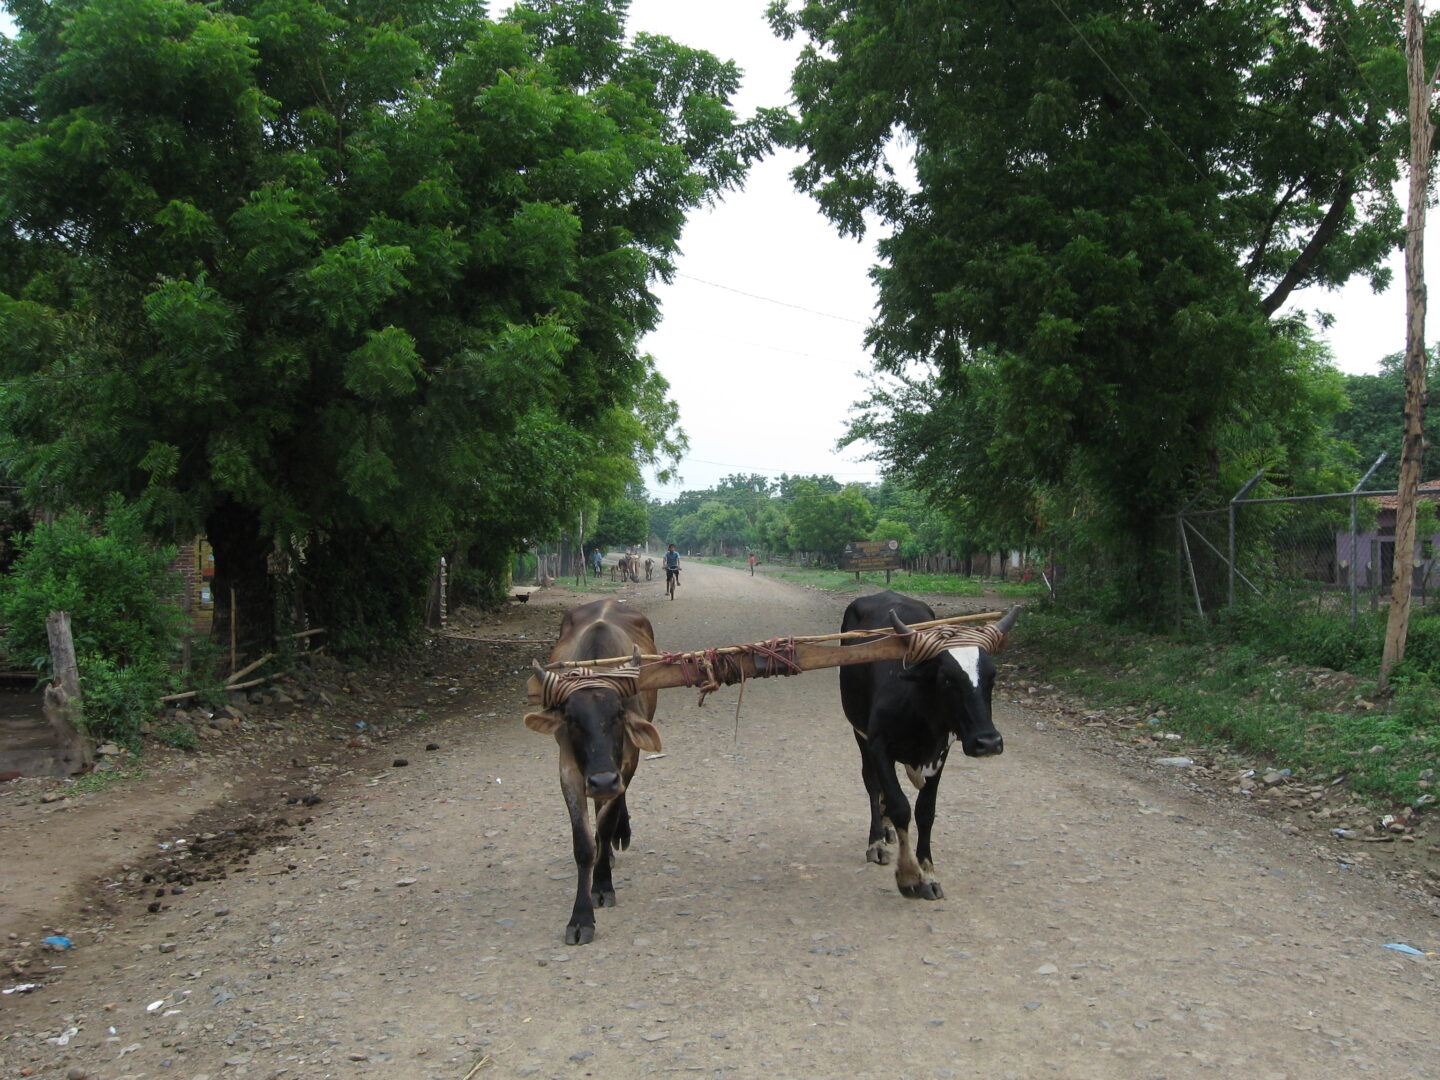 Two Cows Walking on the Road